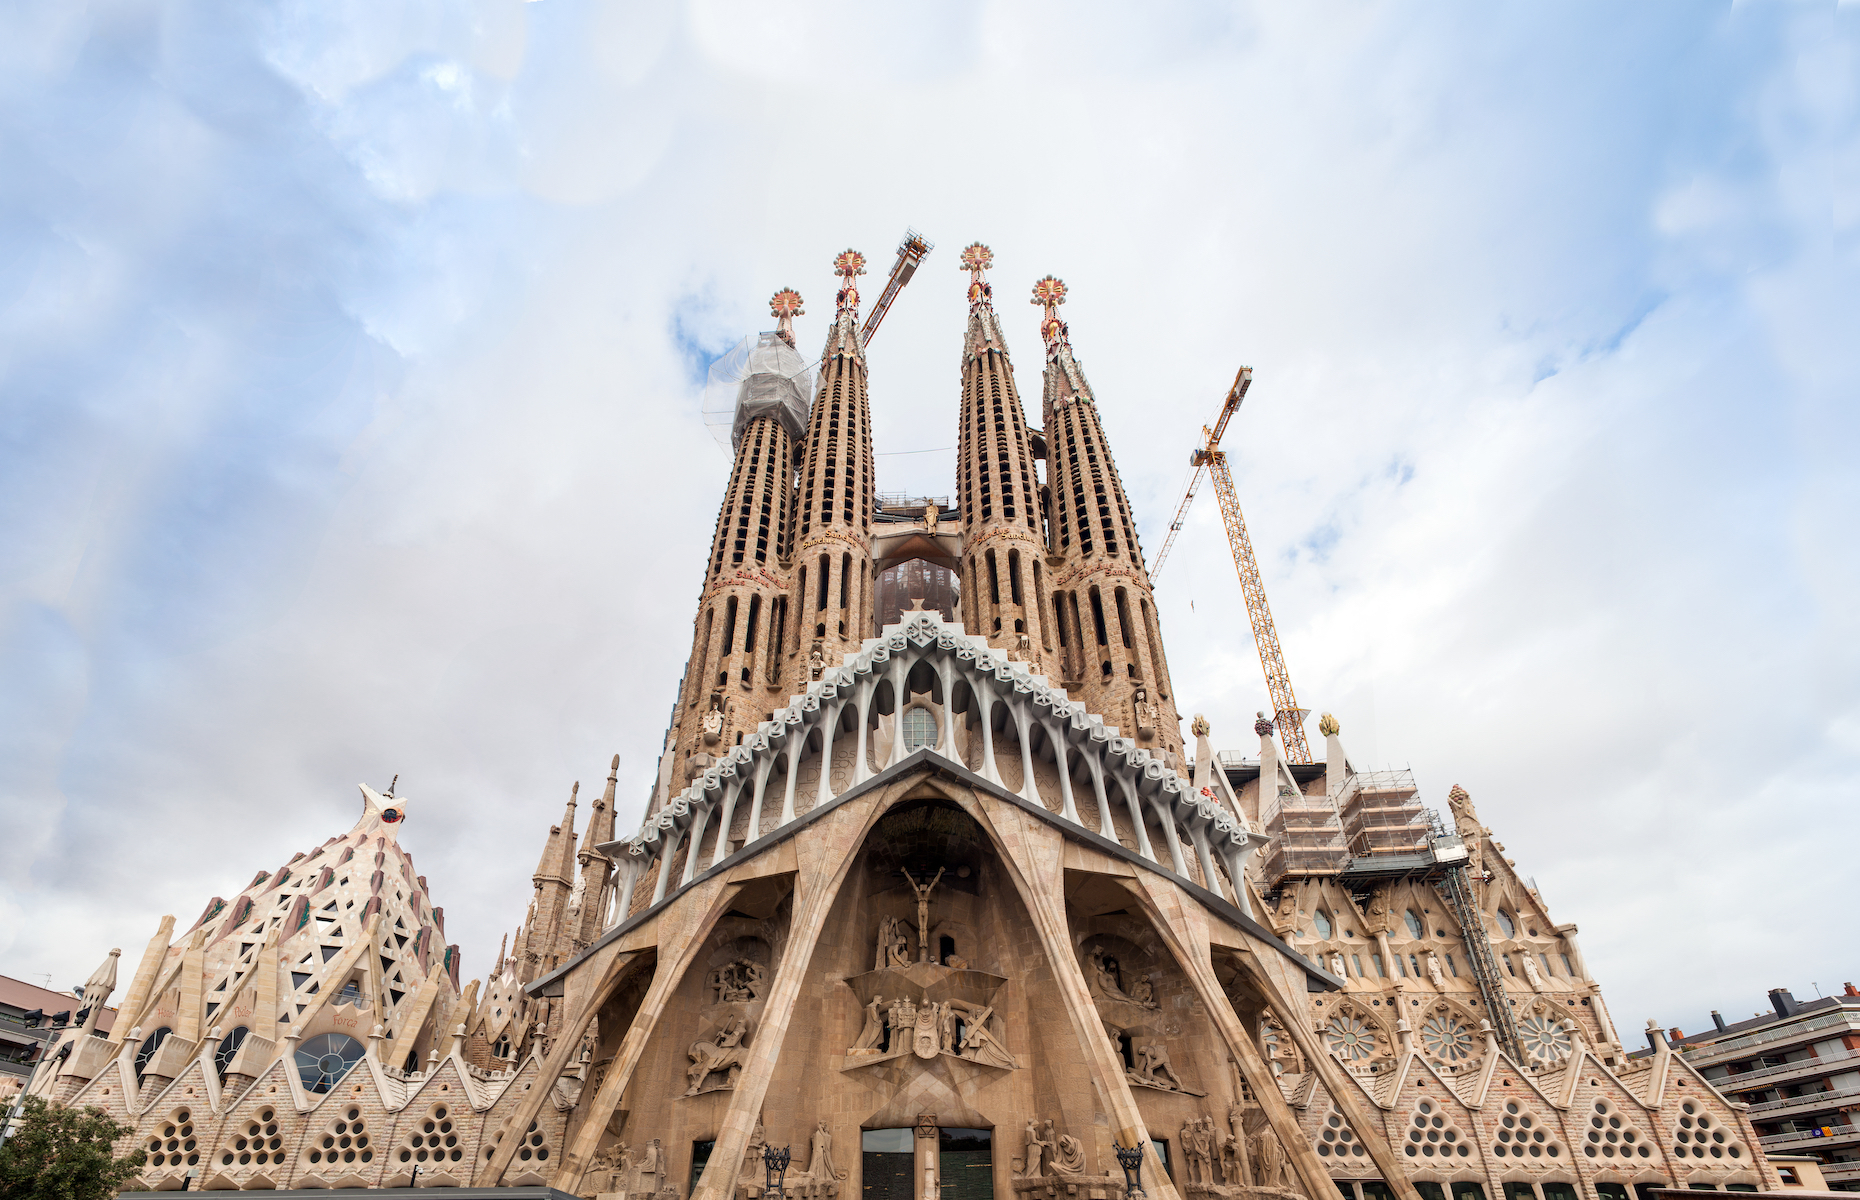 <p>Emblematic of Catalan modernism, Sagrada Familia is Spain’s most visited monument, with an annual attendance of <a href="https://sagrada-familia.fr/en/" rel="noreferrer noopener">more than 3.2 million people</a>. It was left unfinished upon the death of its architect, Antoni Gaudi, but work is now well underway thanks to funds raised by visits. The final basilica, featuring a mix of Gaudi’s favourite styles, Gothic and Art Nouveau, should be completed by 2026.</p>